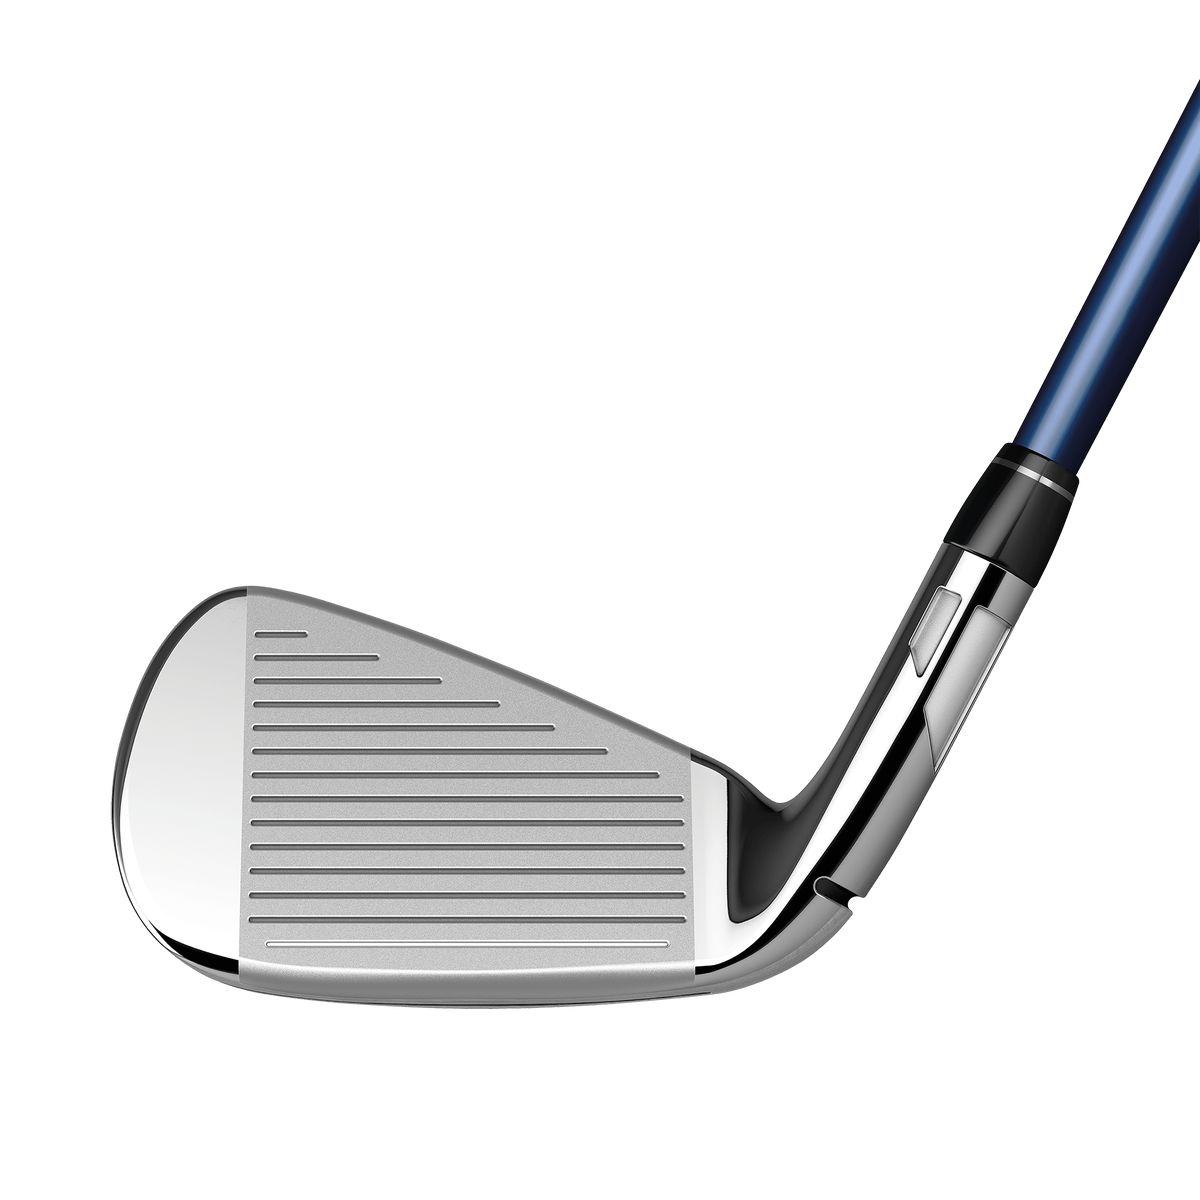 TaylorMade SIM Max OS Iron Set · Left handed · Steel · Regular · 5-PW,AW